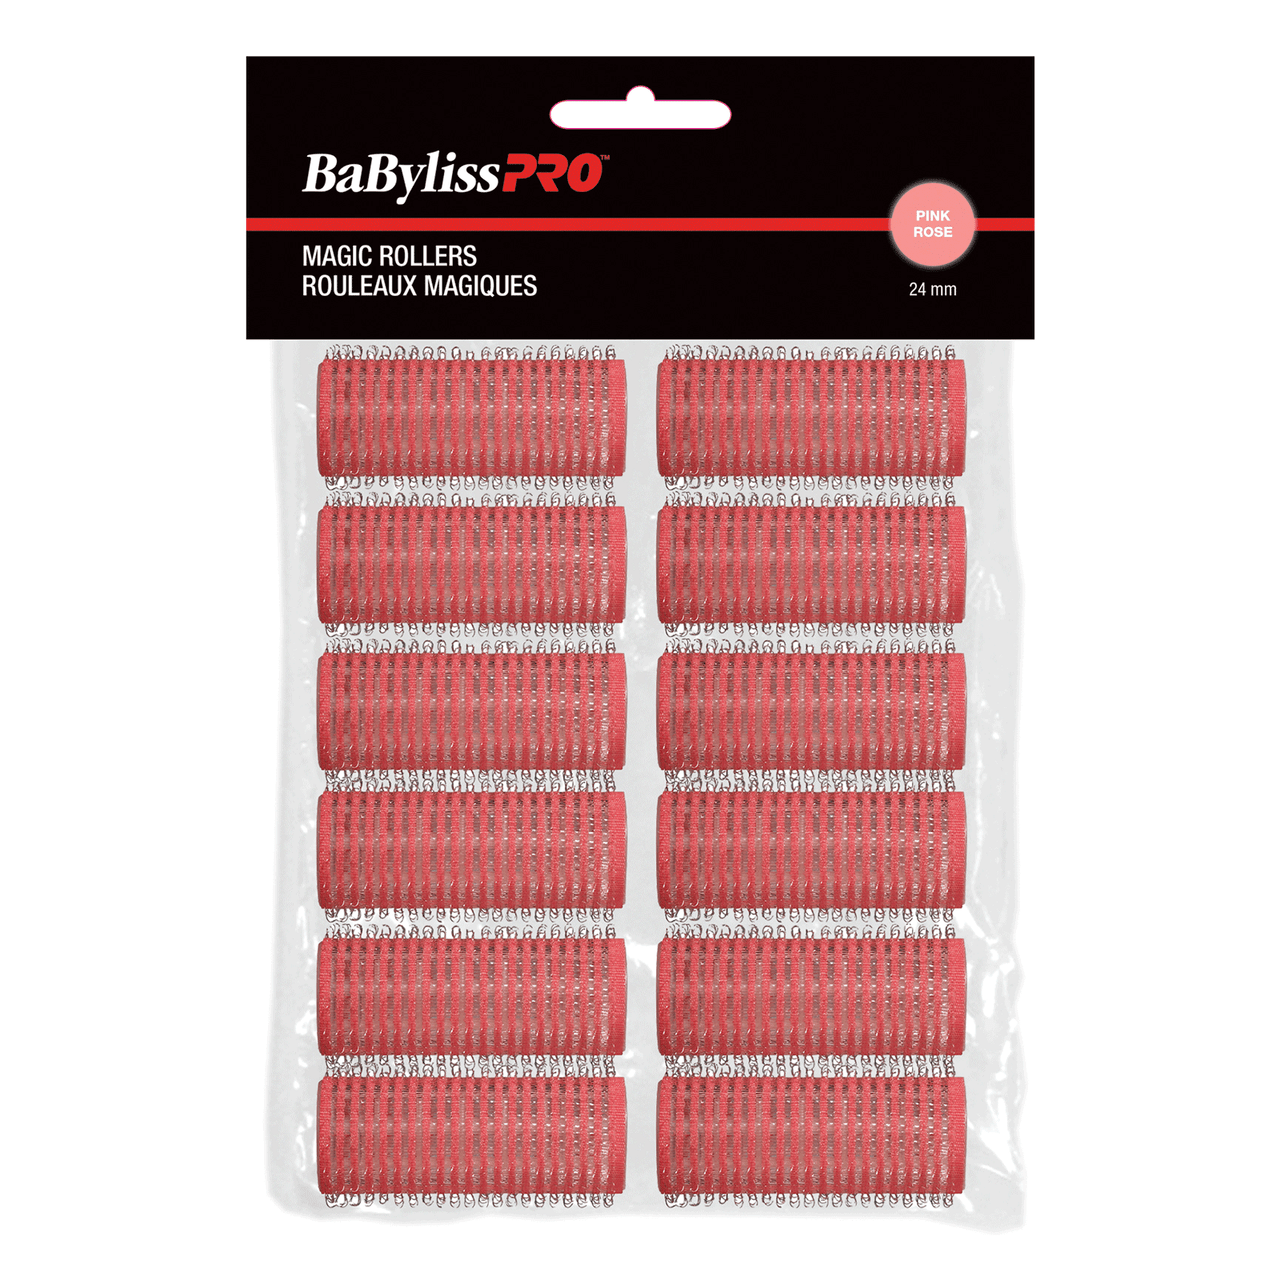 Dannyco Sundries BaByliss Pro Self Gripping Magic Rollers - 12 Count